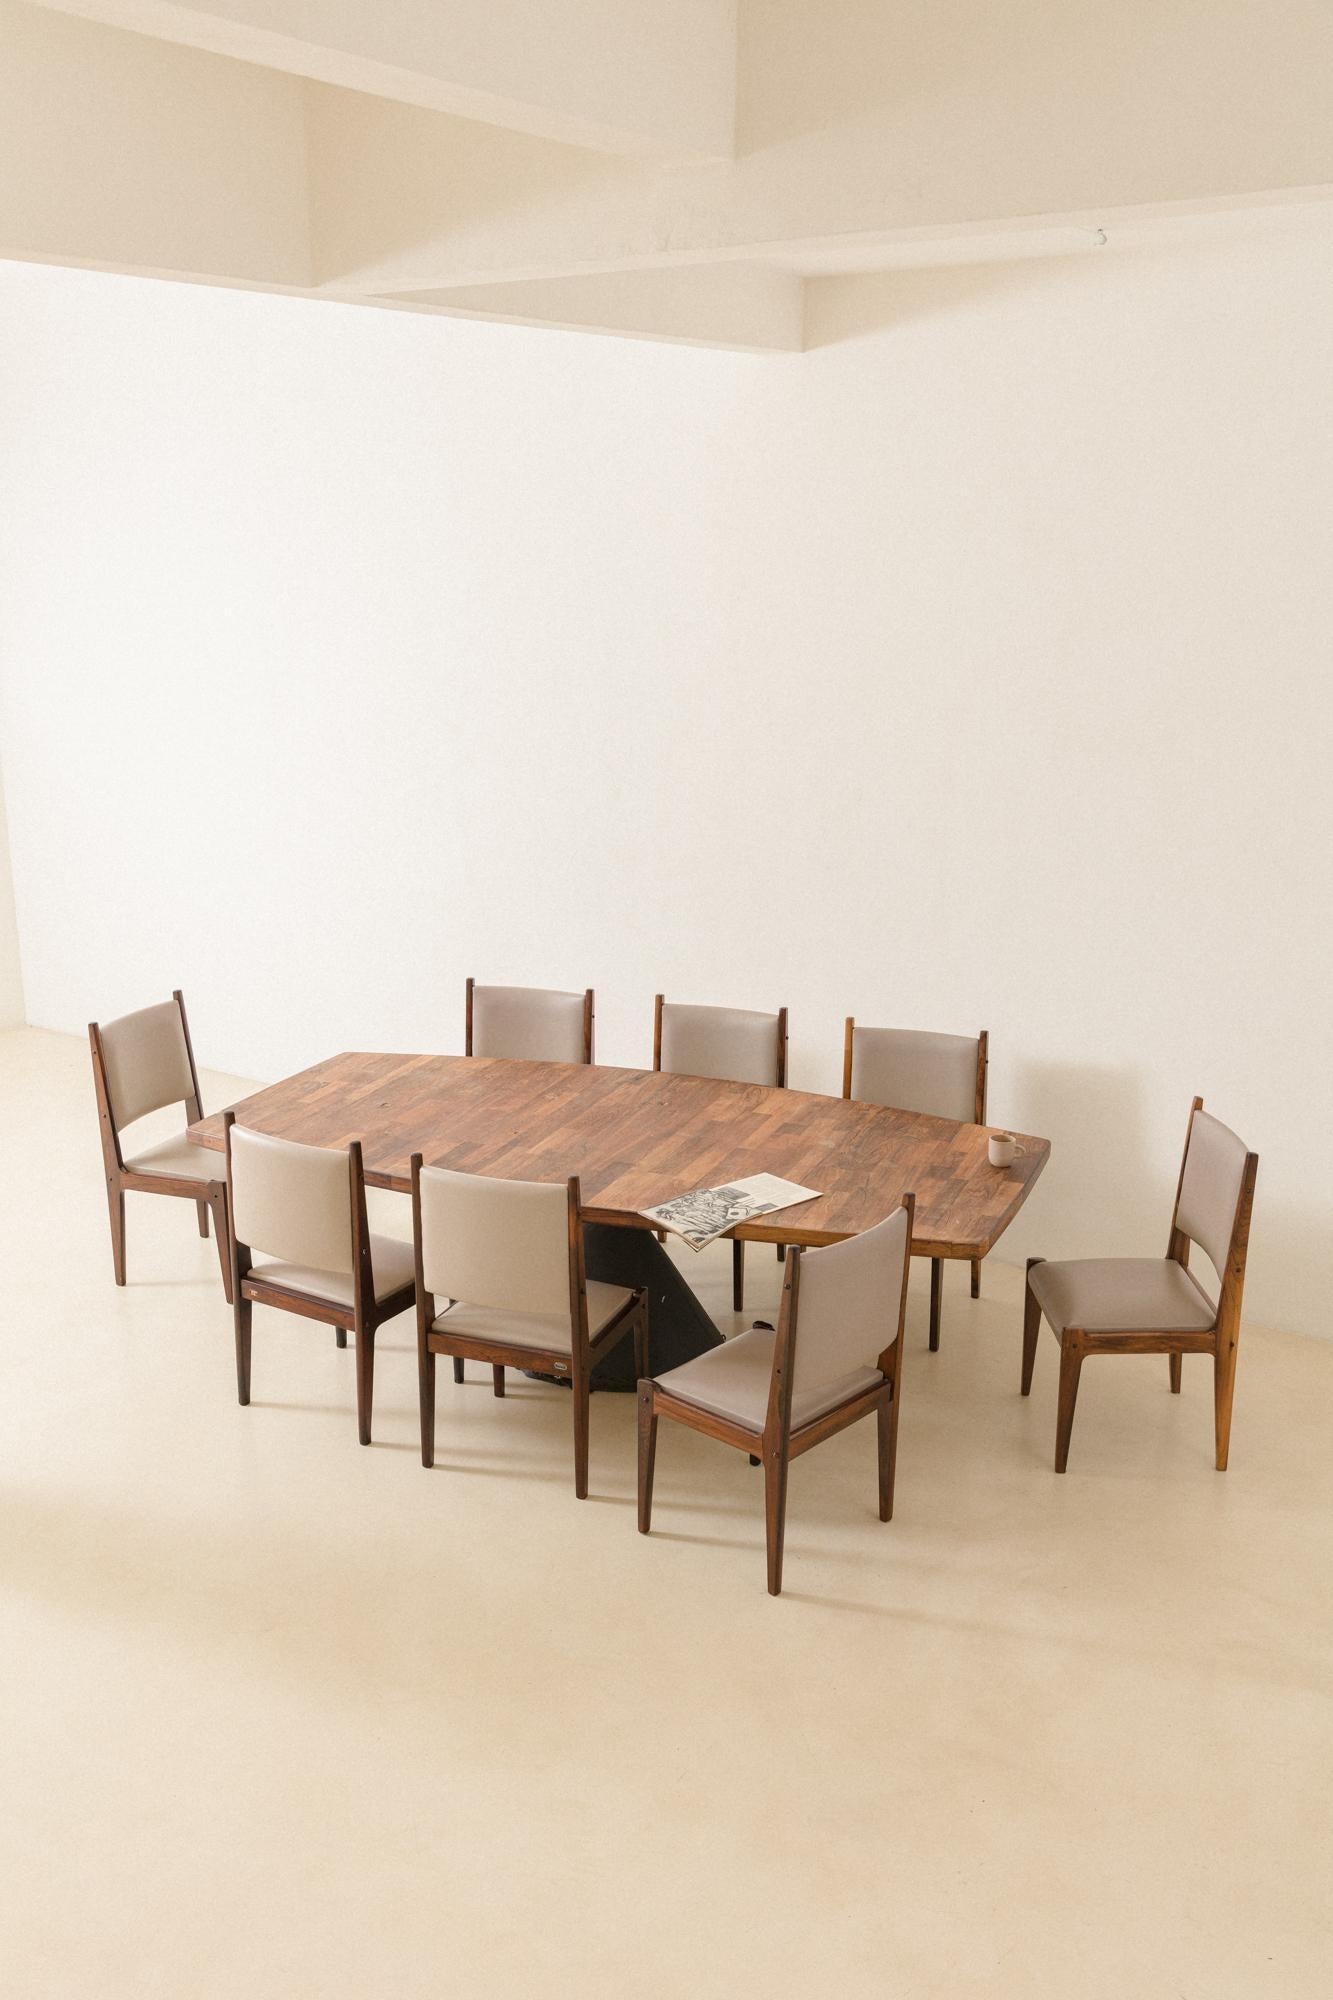 Bloch Chairs by Sergio Rodrigues, Brazilian Midcentury Design, 1964 For Sale 3